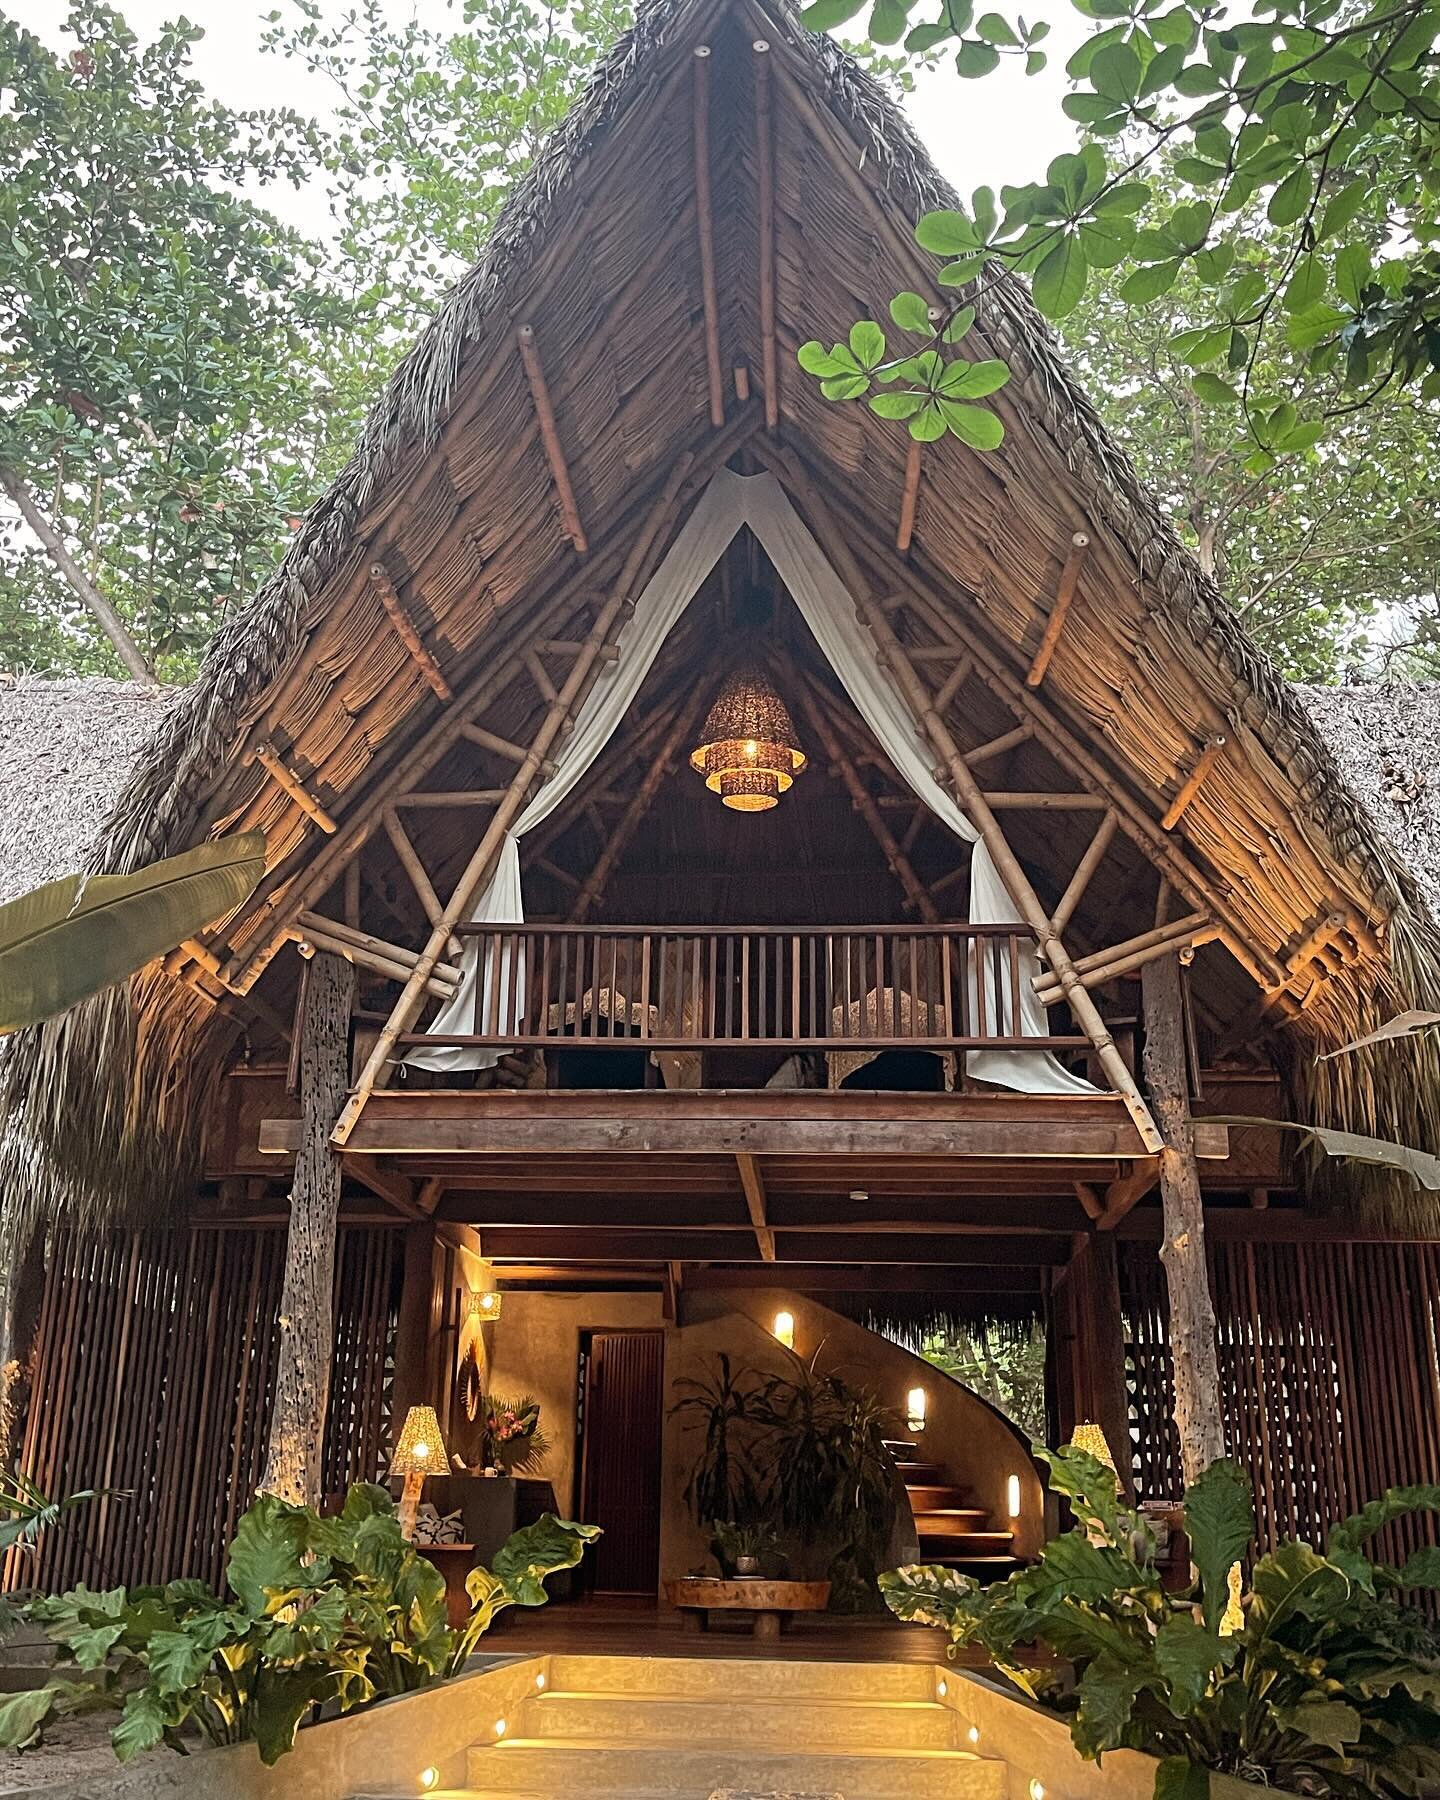 Discover tranquility and rejuvenation at our Jungle Beach Spa, where natural surroundings complement holistic treatments and healing body work, creating a sanctuary for relaxation and wellness.

#spa #junglespa #gitanaspa #holisticservices #healing #